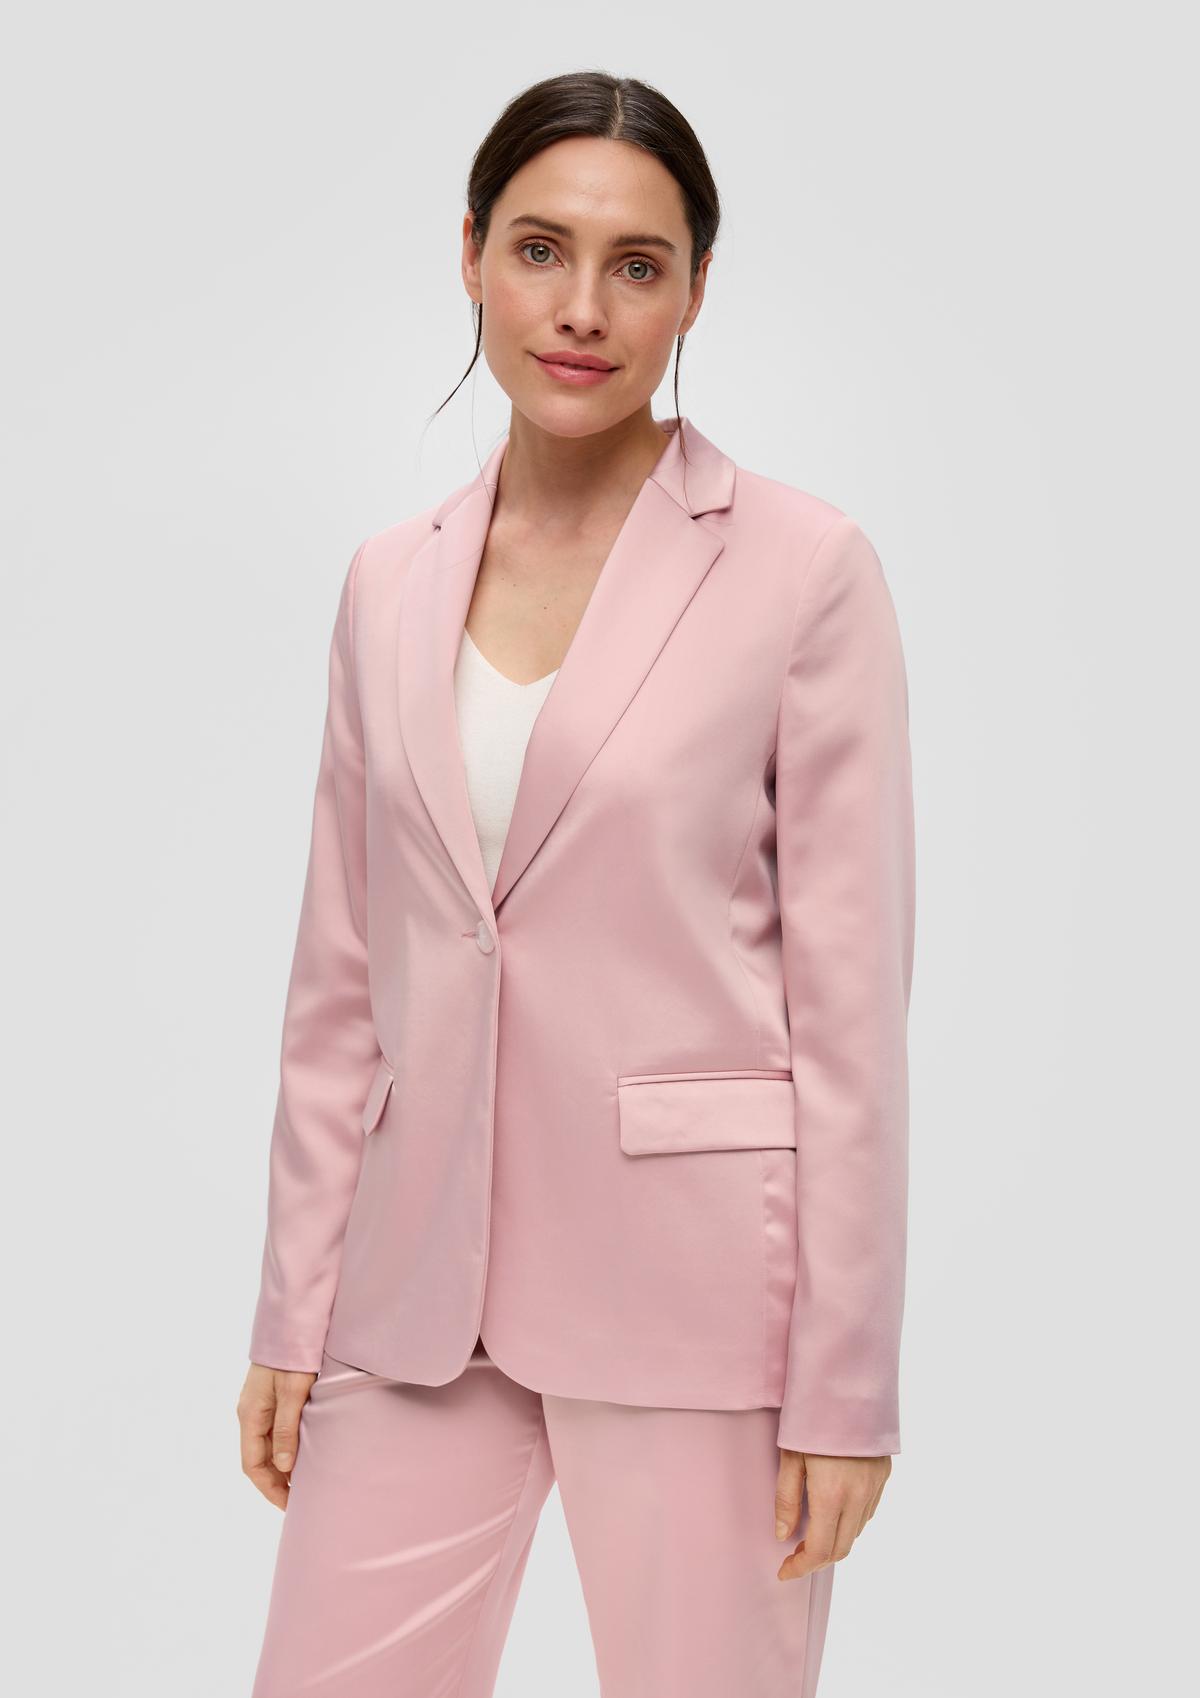 Blazer with a smooth texture